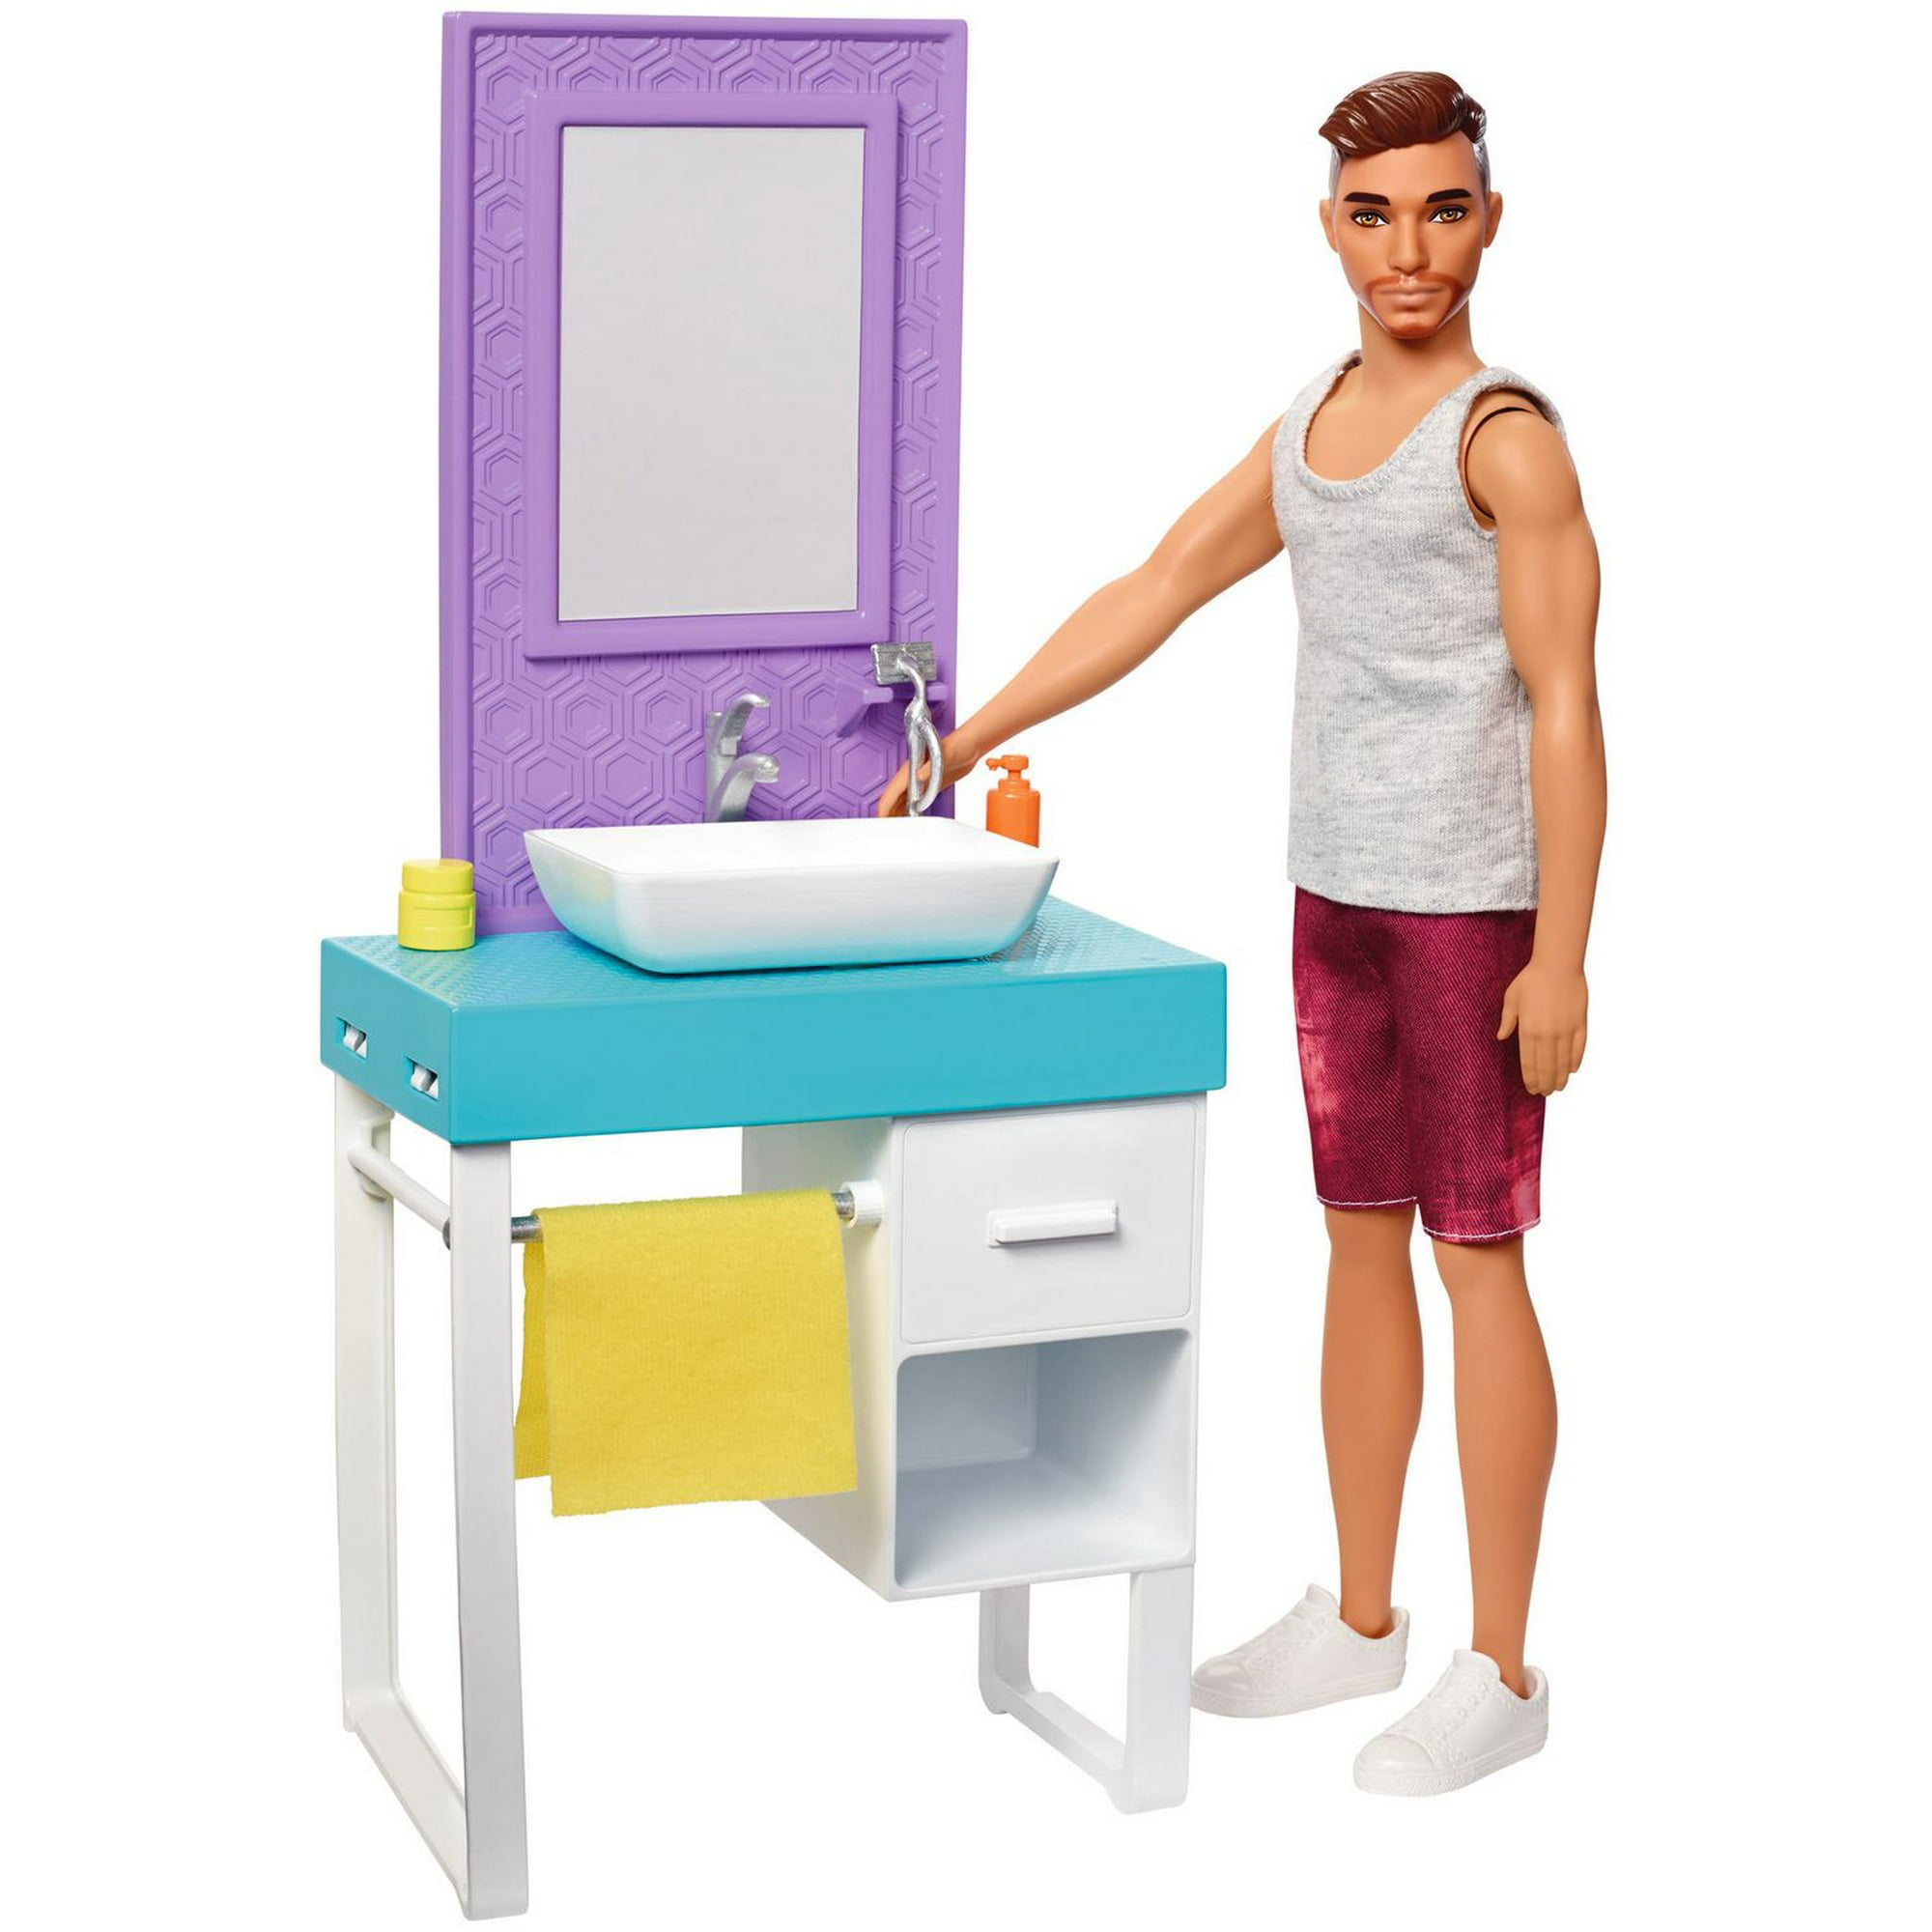 Barbie Ken Laundry-Themed Playset with Ken Doll and Spinning